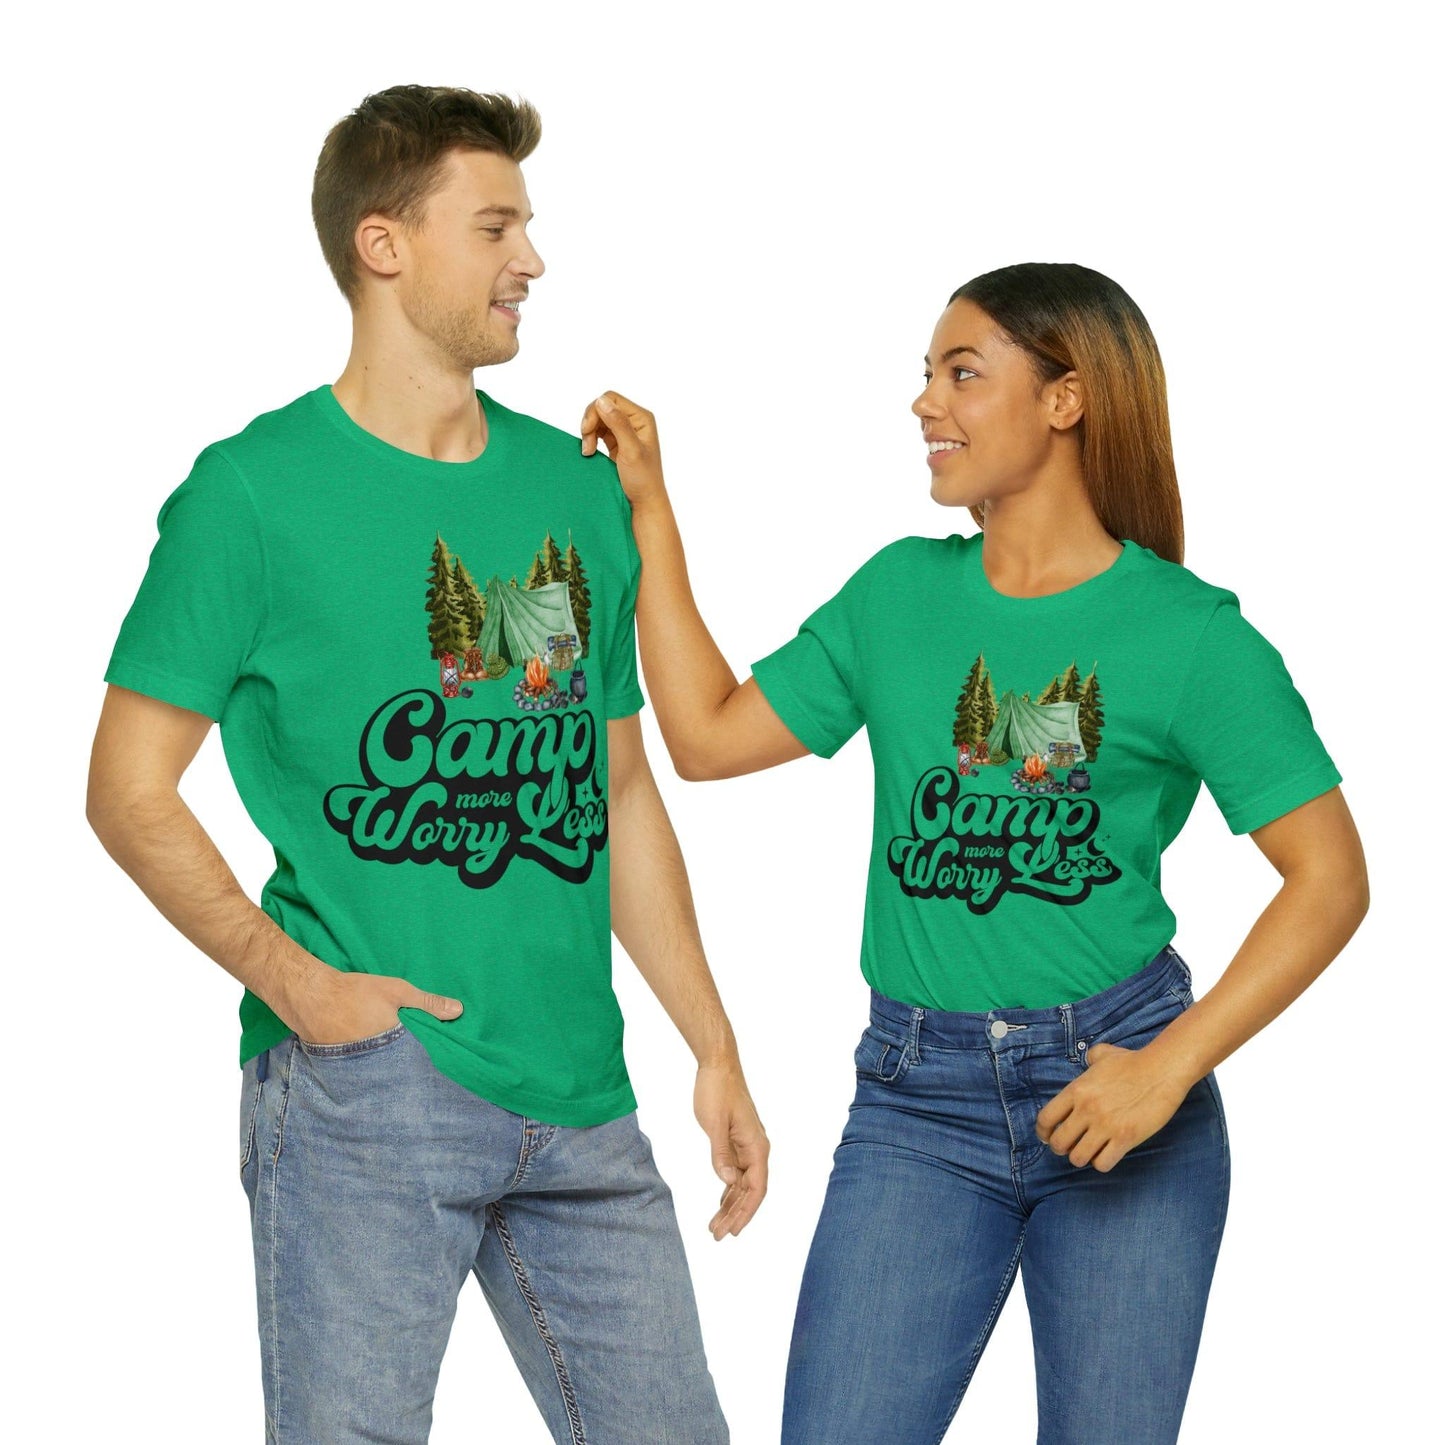 Camp More Worry Less Shirt, Outdoor adventure clothing, Nature-inspired shirts, Hiking apparel, Outdoor enthusiasts gift, Adventure-themed attire